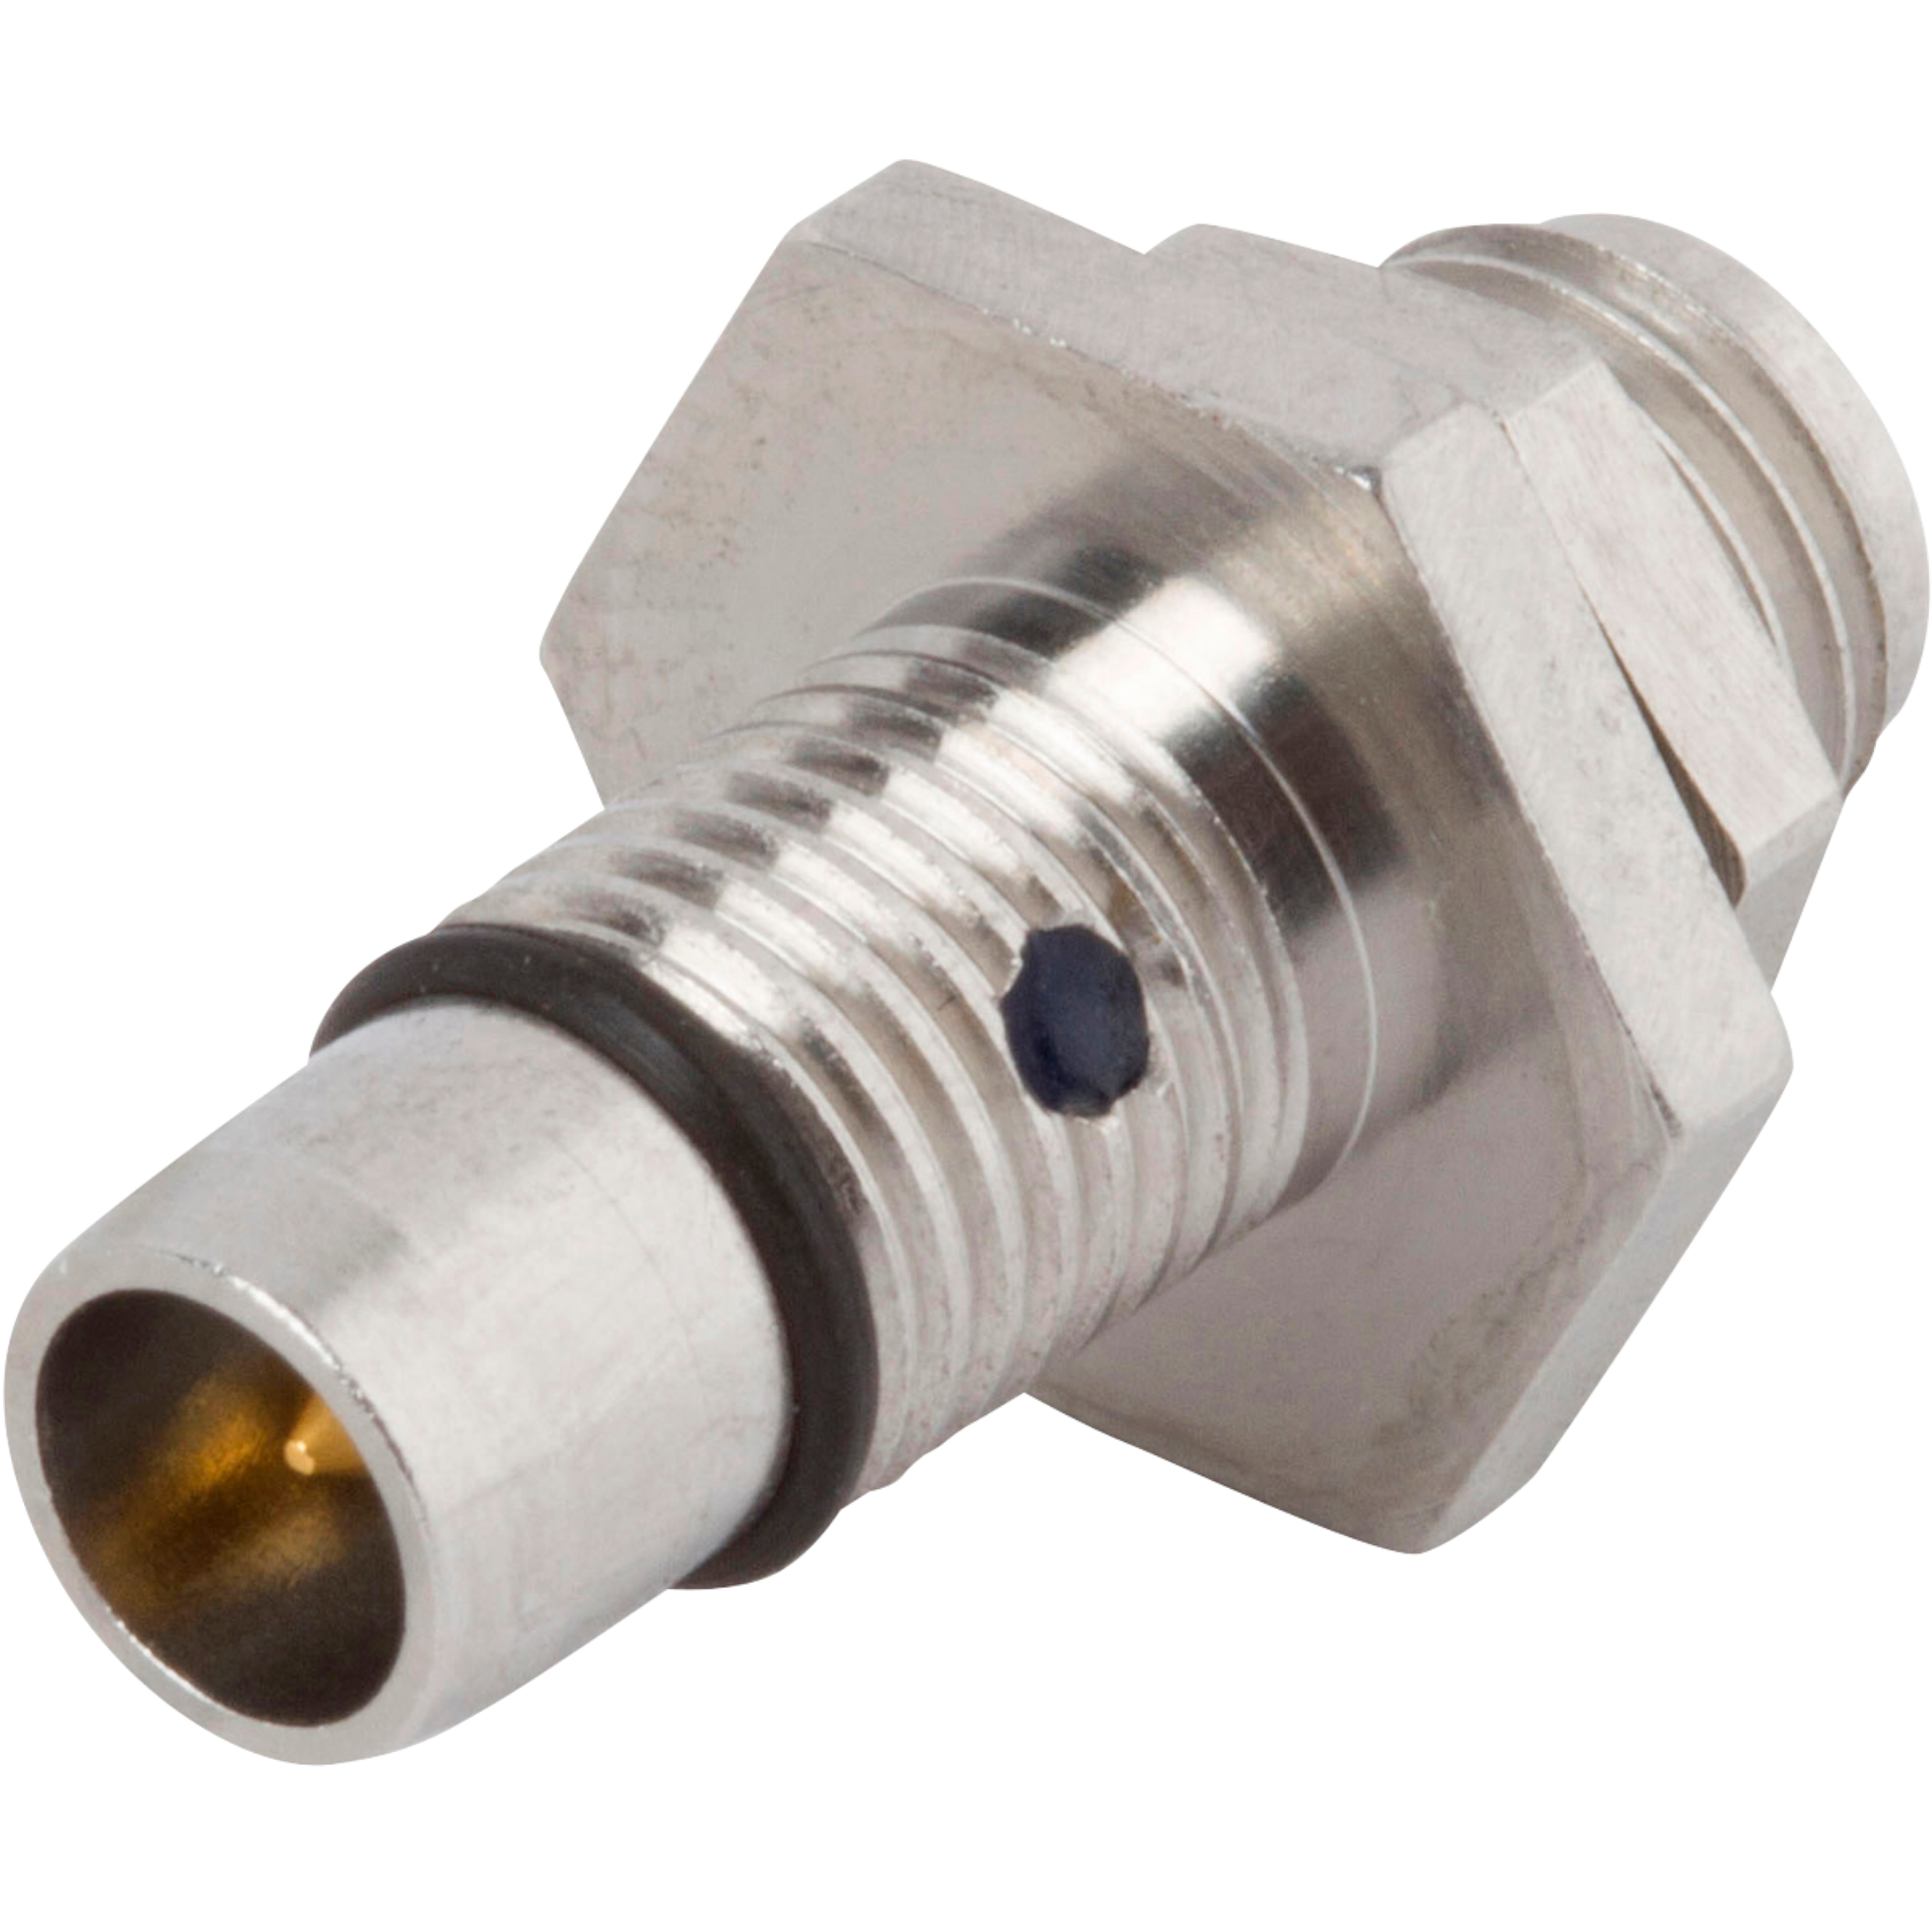 Picture of BMA Male to SMA Female Adapter